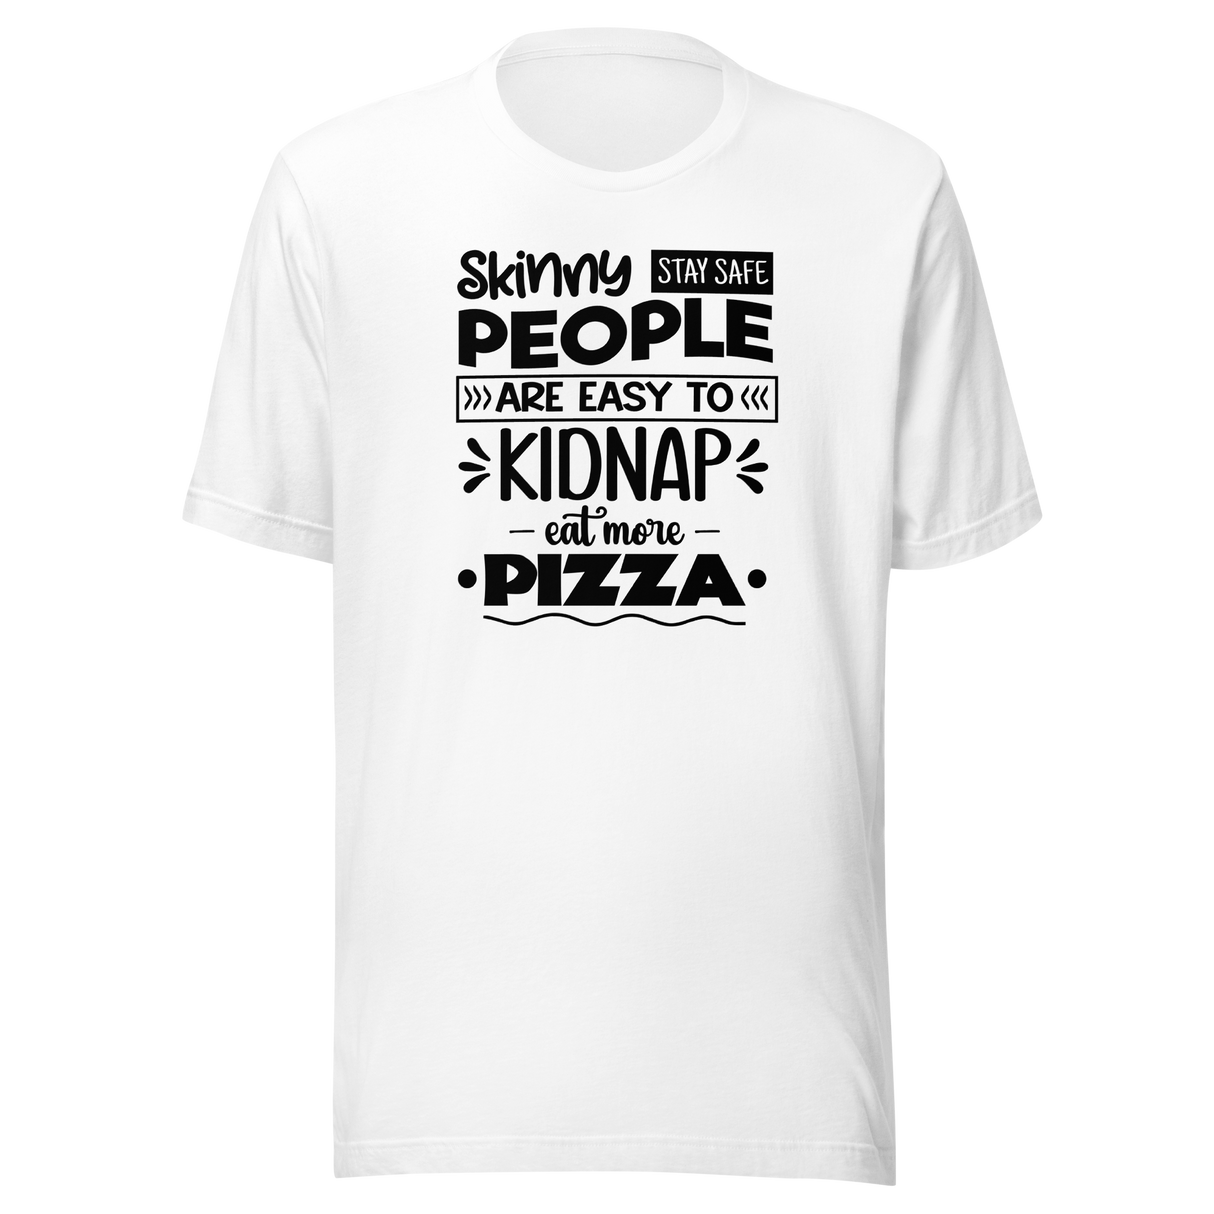 skinny-people-are-easy-to-kidnap-eat-more-pizza-stay-safe-food-tee-life-t-shirt-pizza-tee-food-t-shirt-humor-tee#color_white